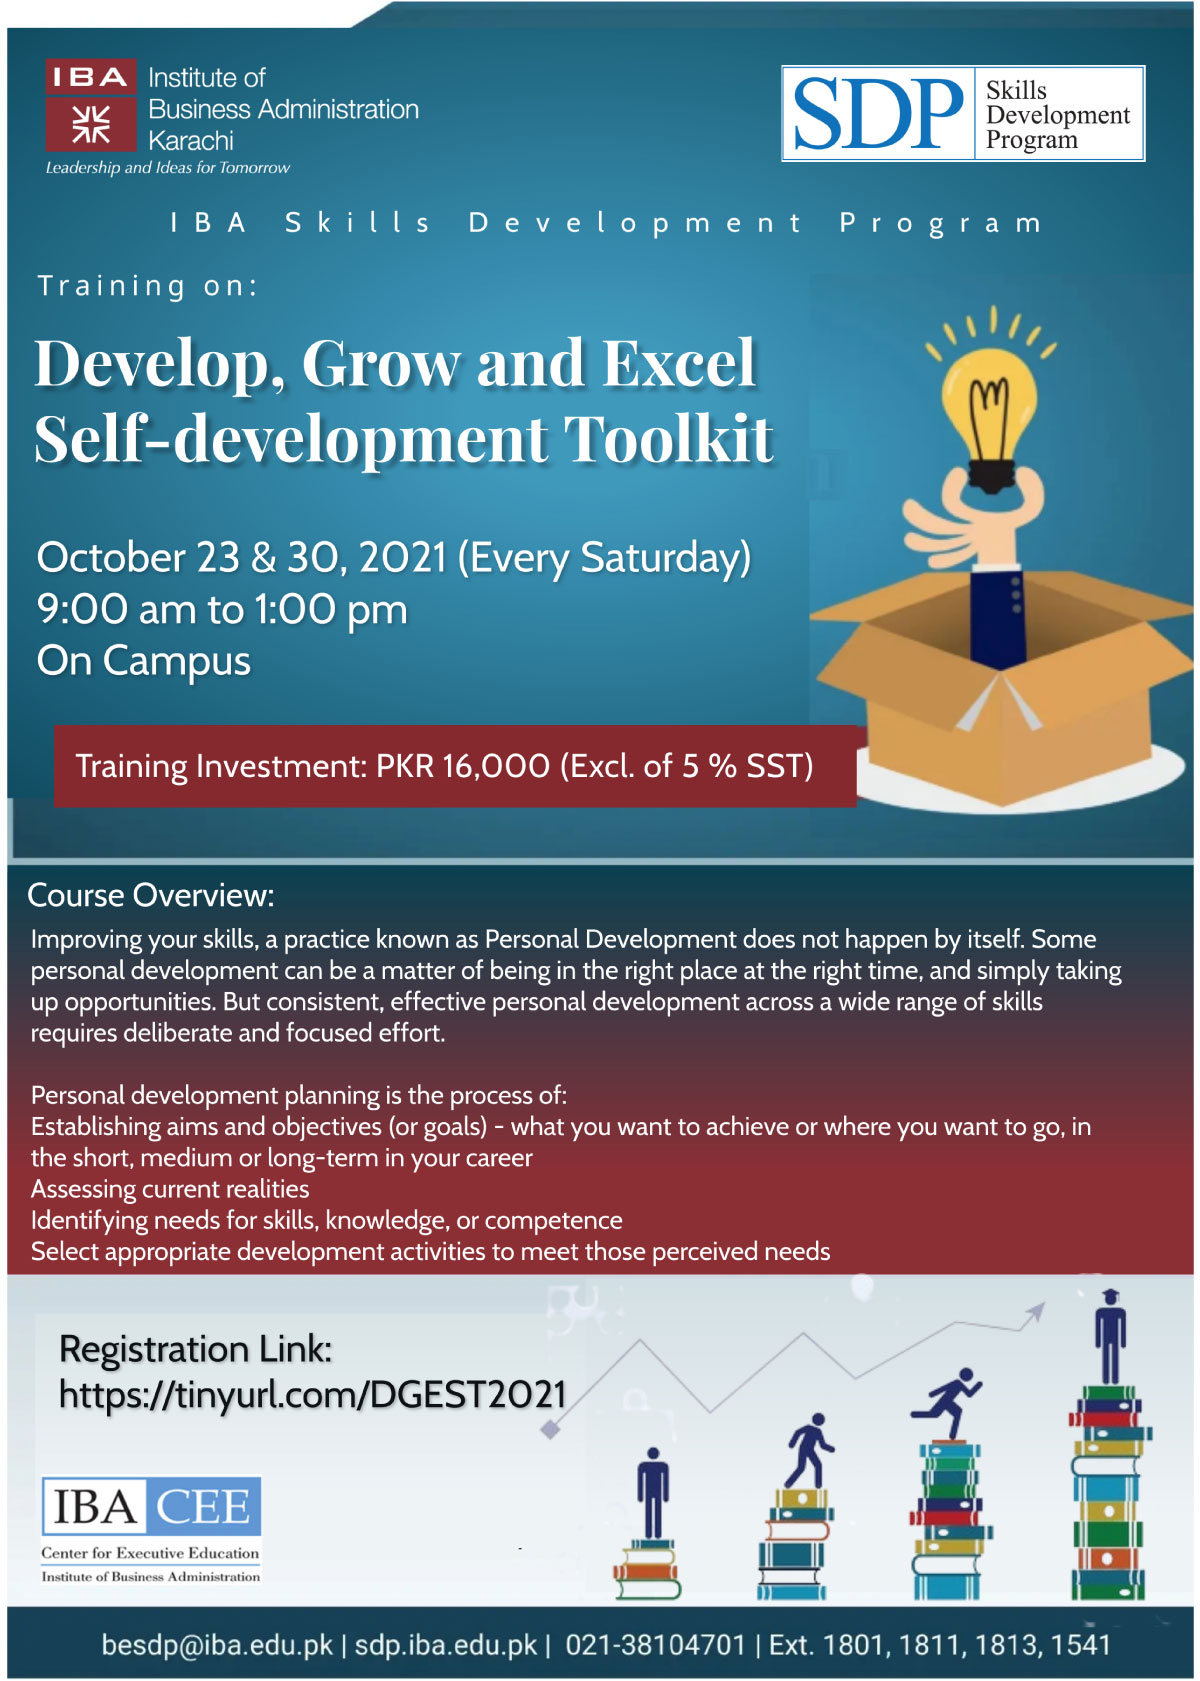 Develop, Grow and Excel Self-development Toolkit